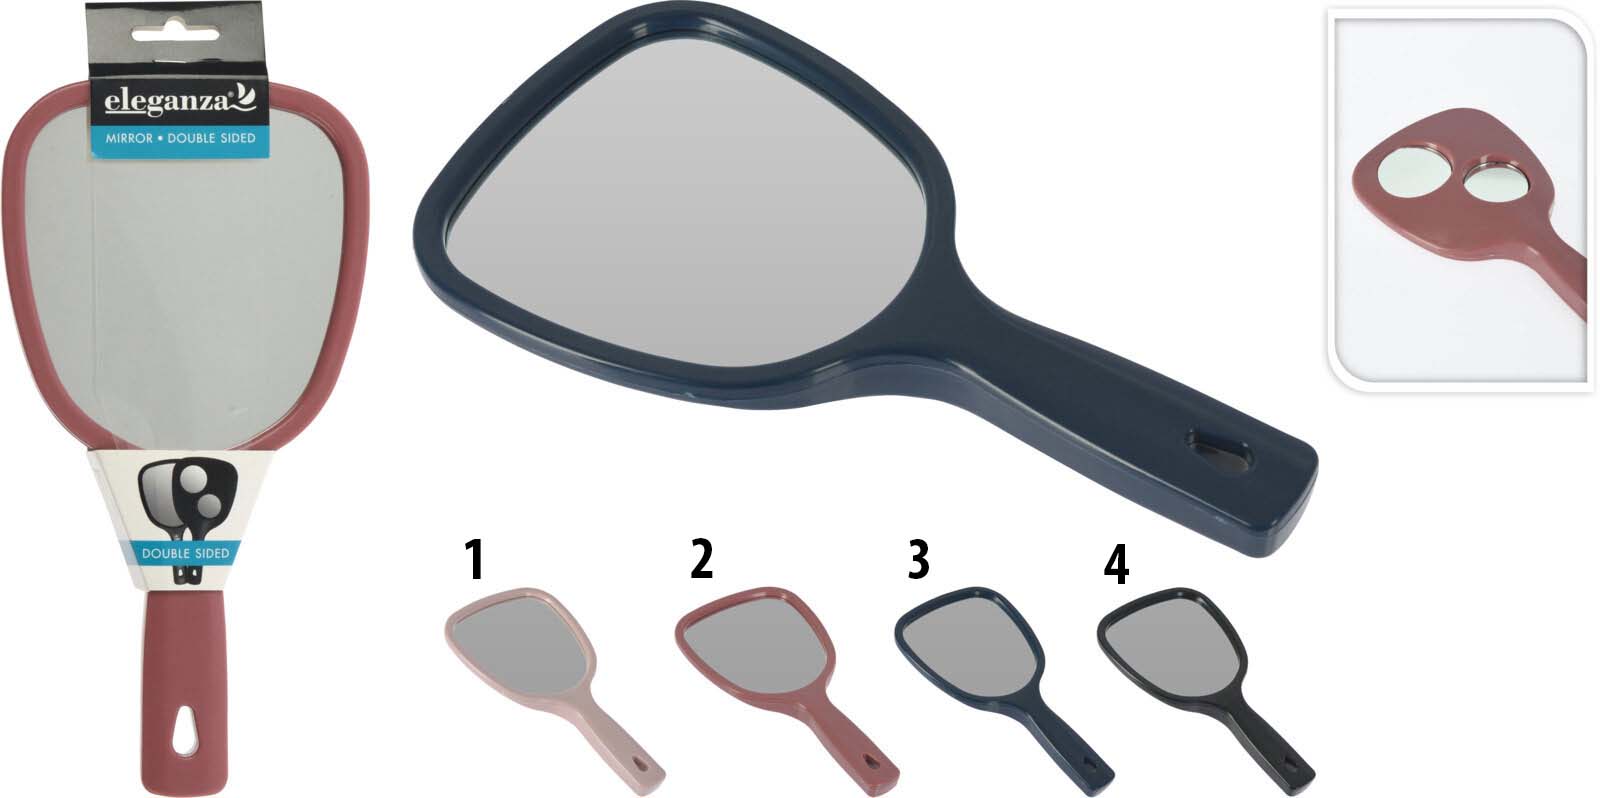 MAKE UP MIRROR WITH HANDLE 4 ASSORTED COLORS